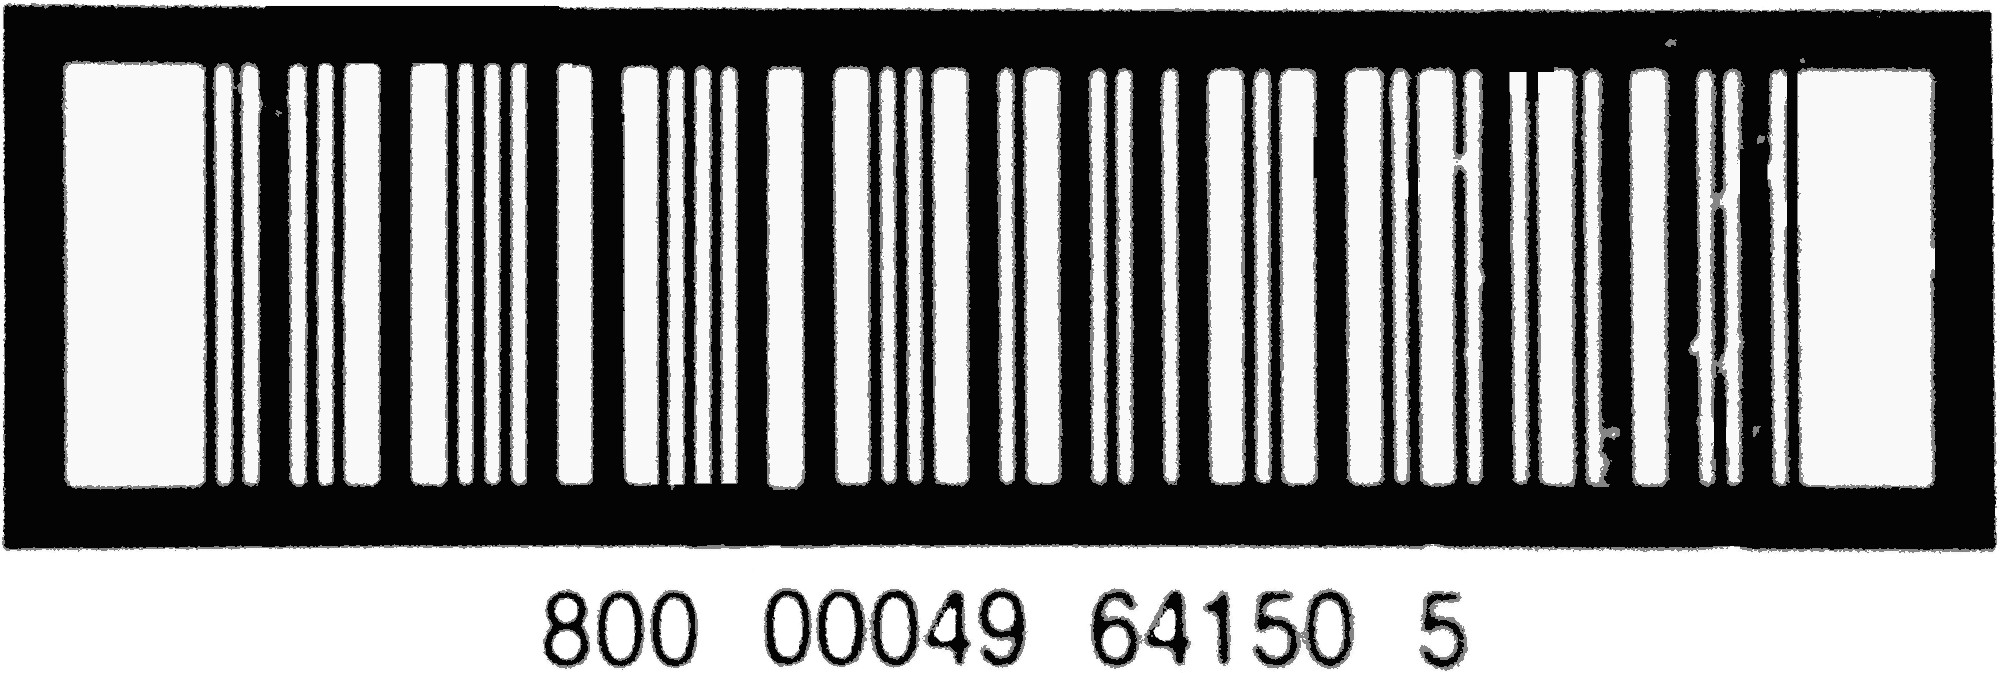 image red barcode clipart